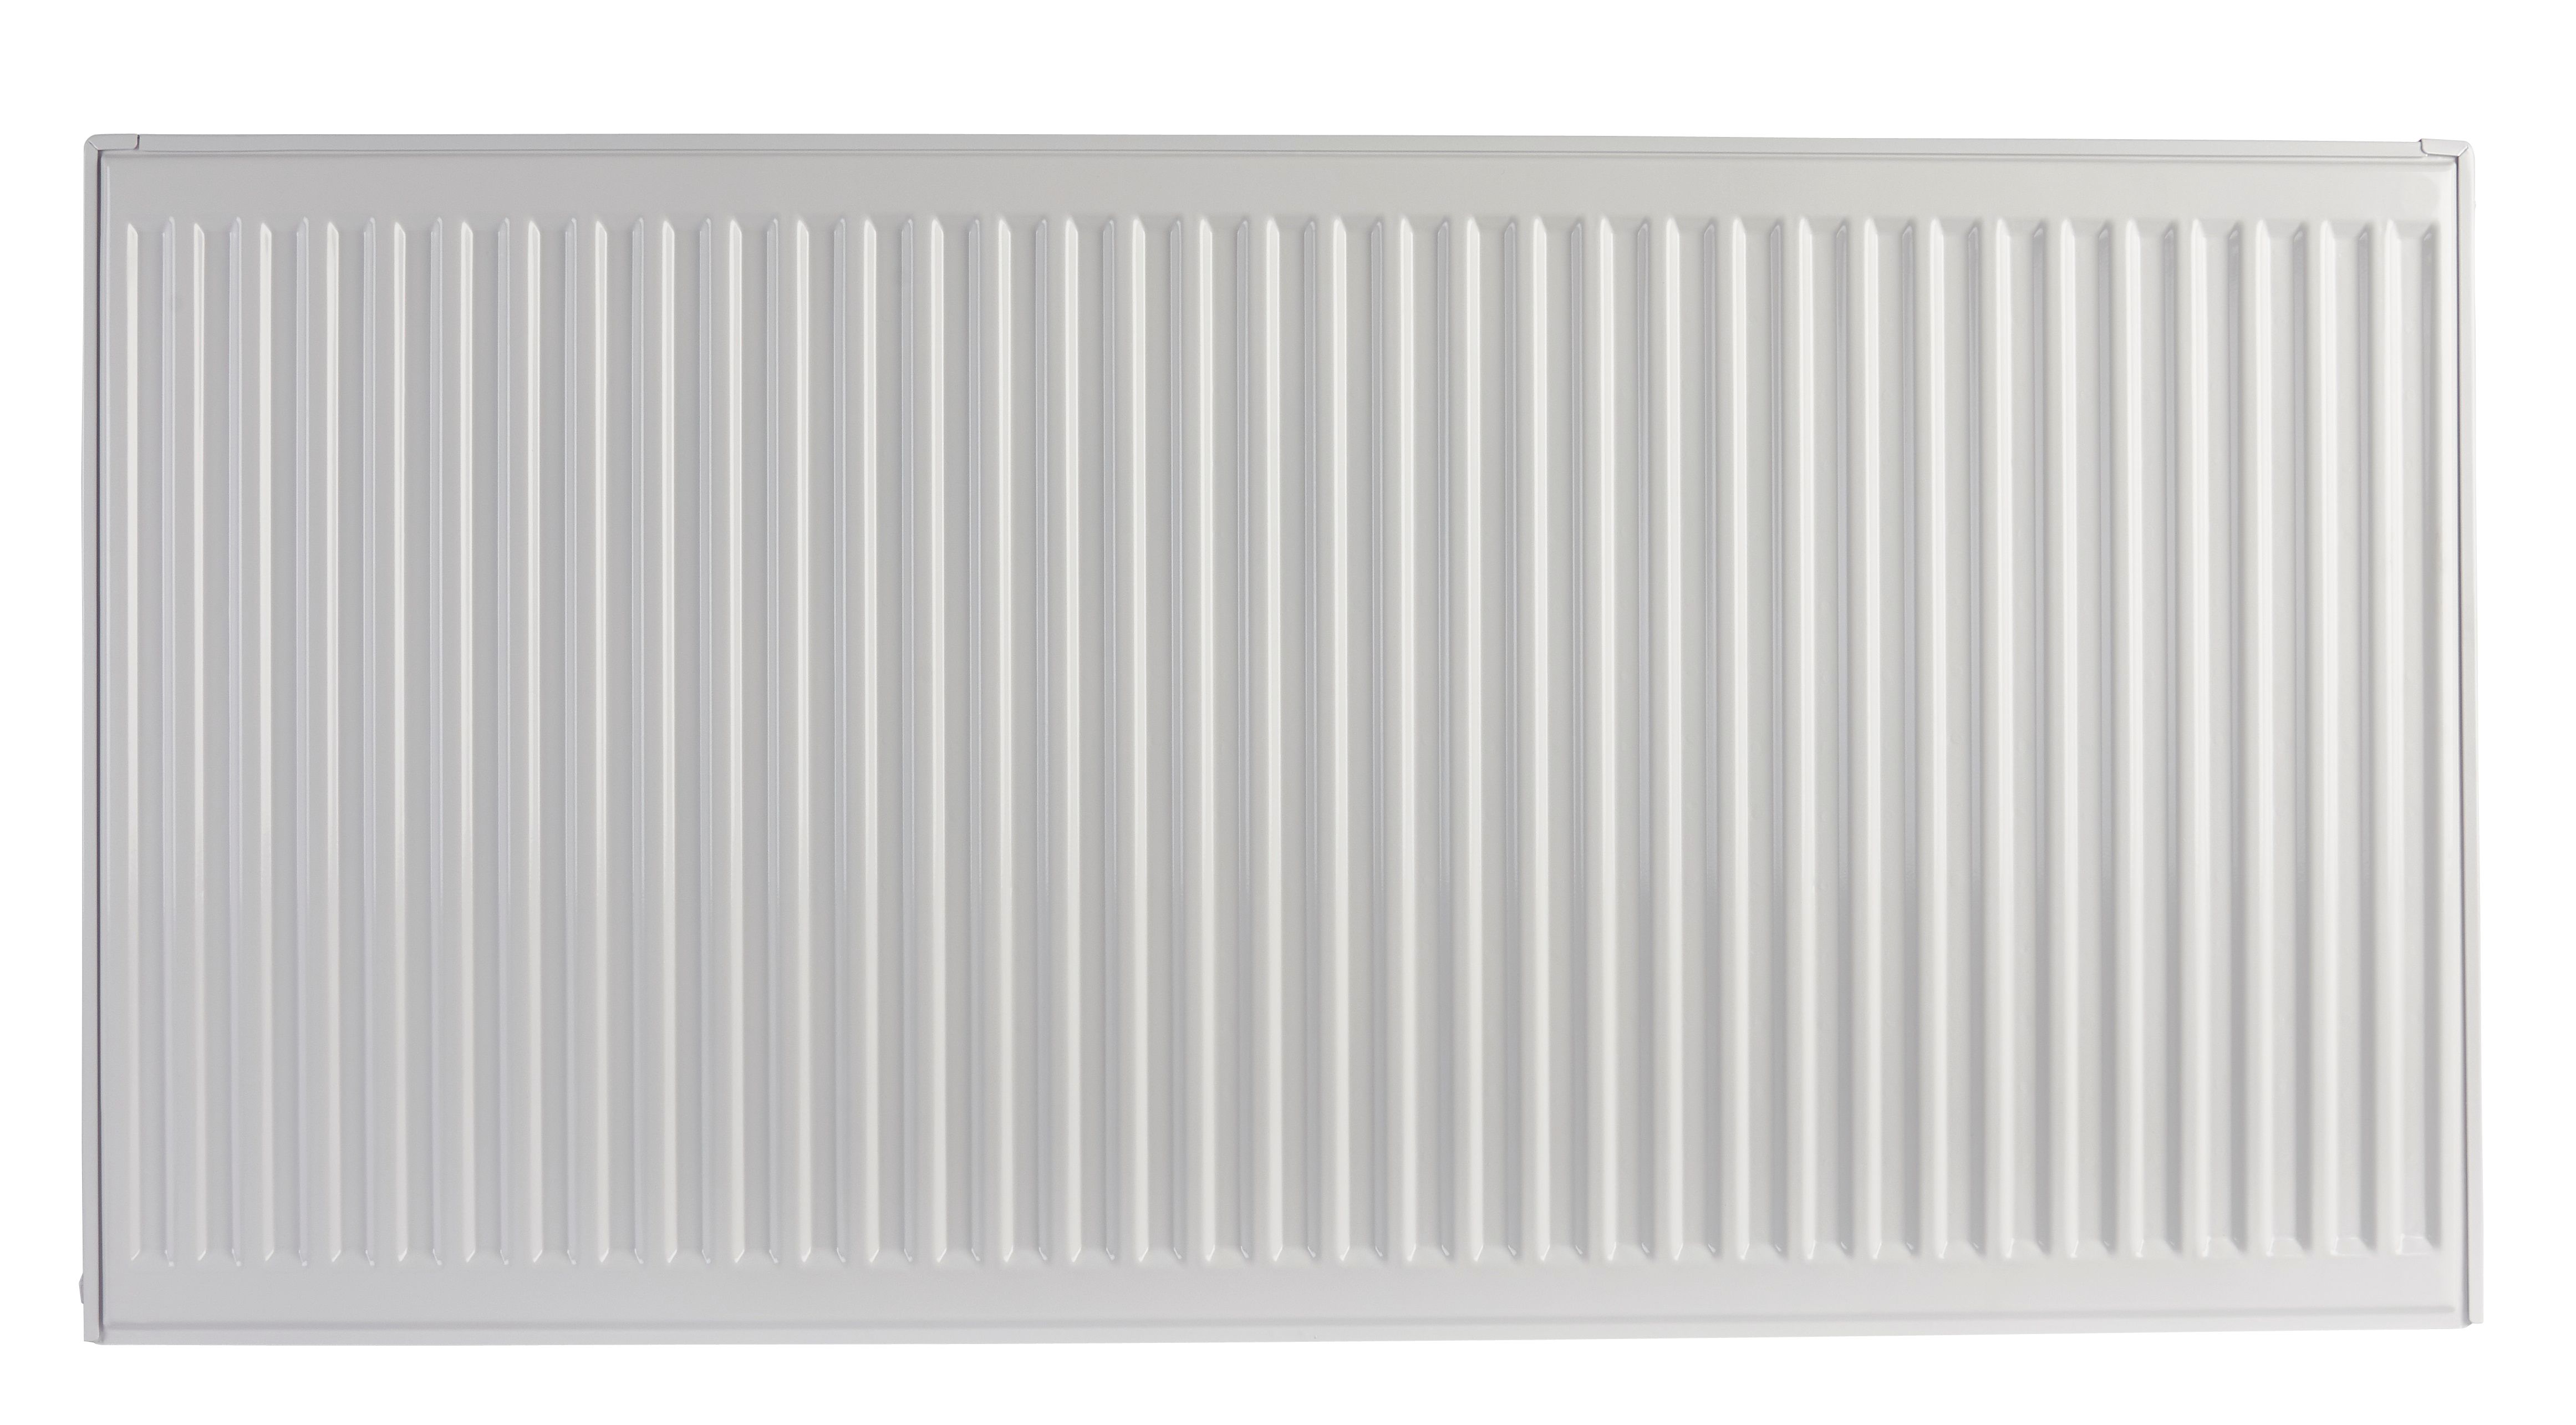 Image of Homeline by Stelrad 500 x 1100mm Type 22 Double Panel Premium Double Convector Radiator